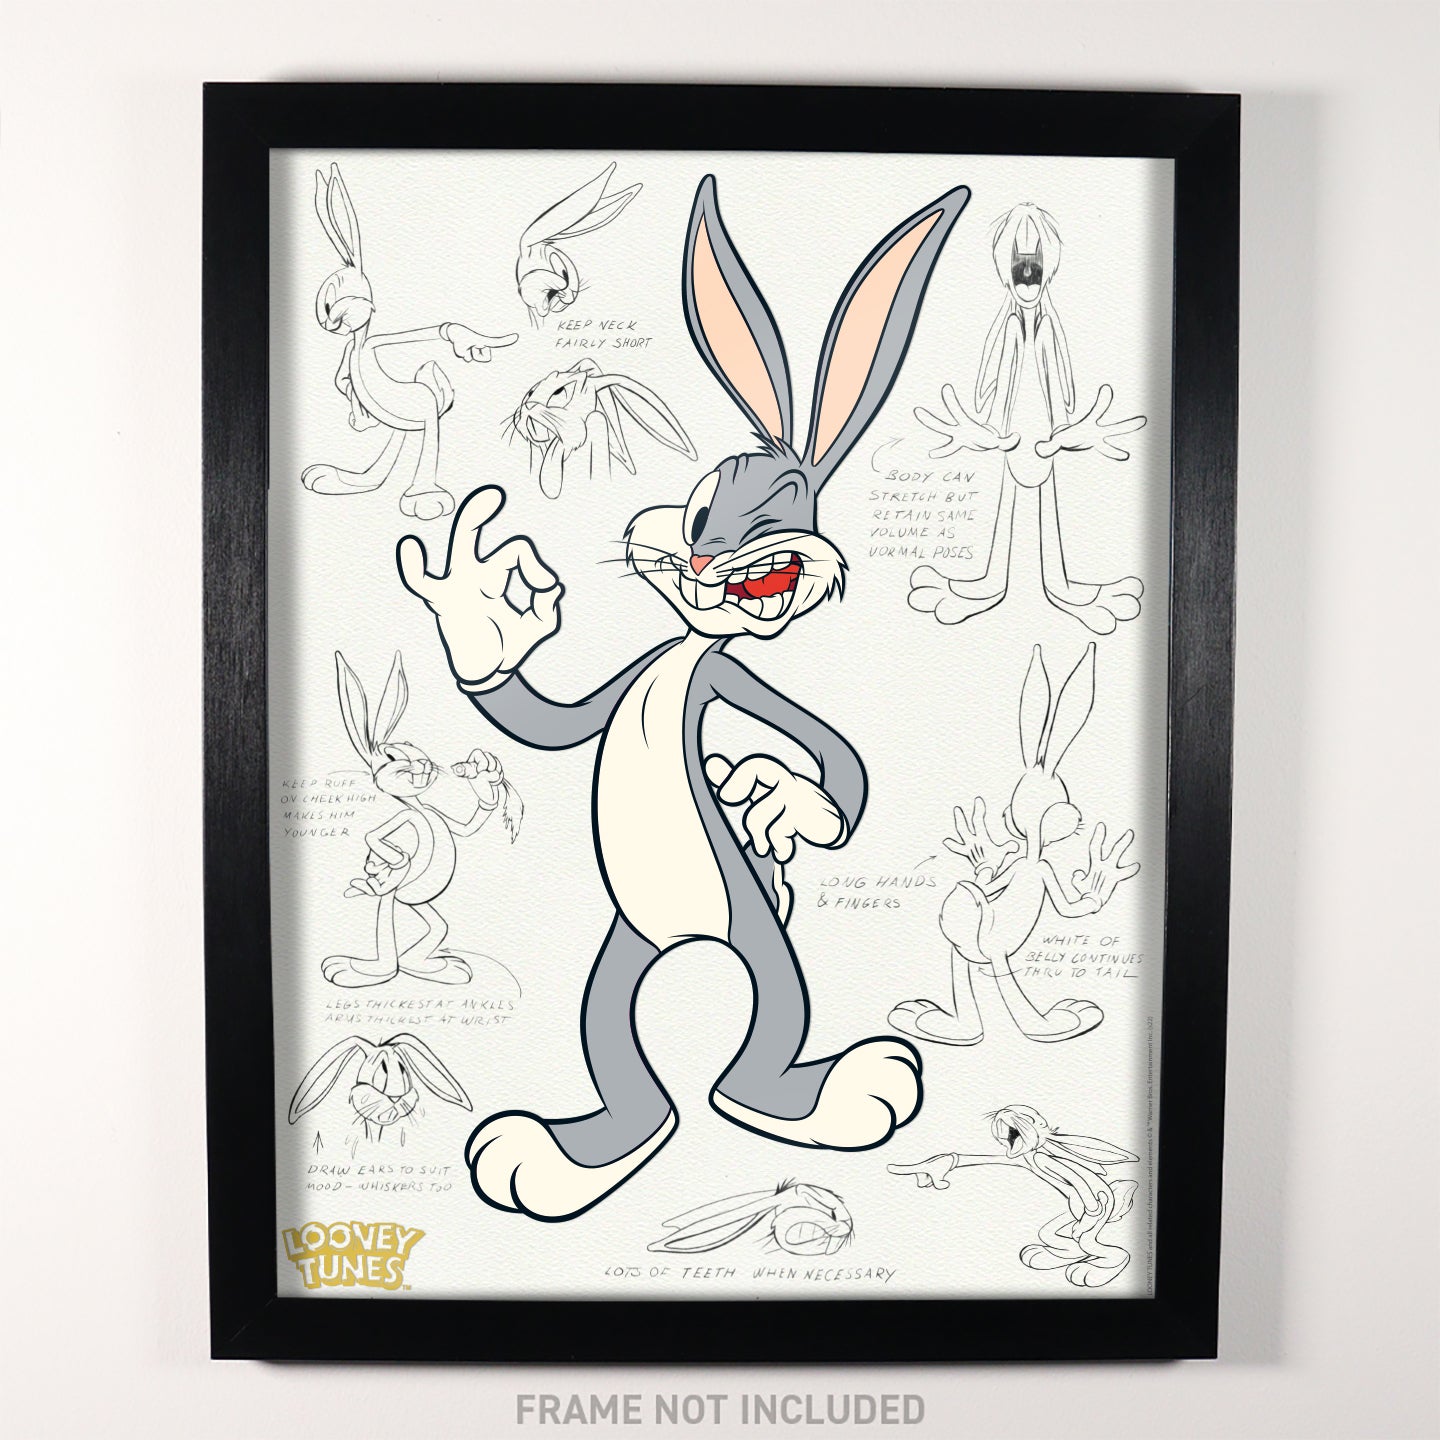 The Looney Tunes Bugs Bunny Limited Edition Fan-Cel